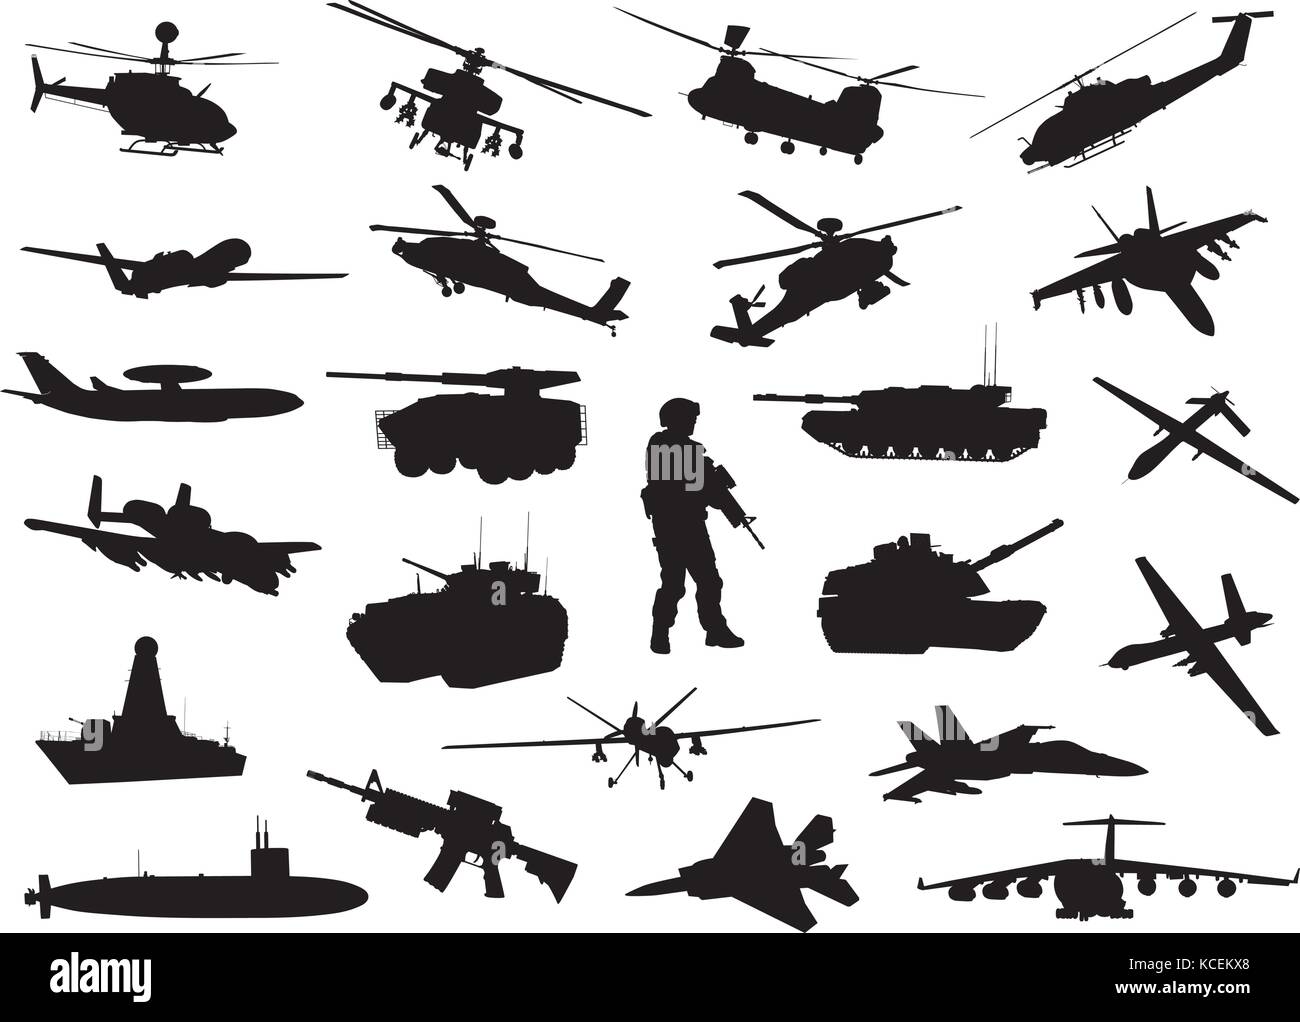 Military silhouettes Stock Vector